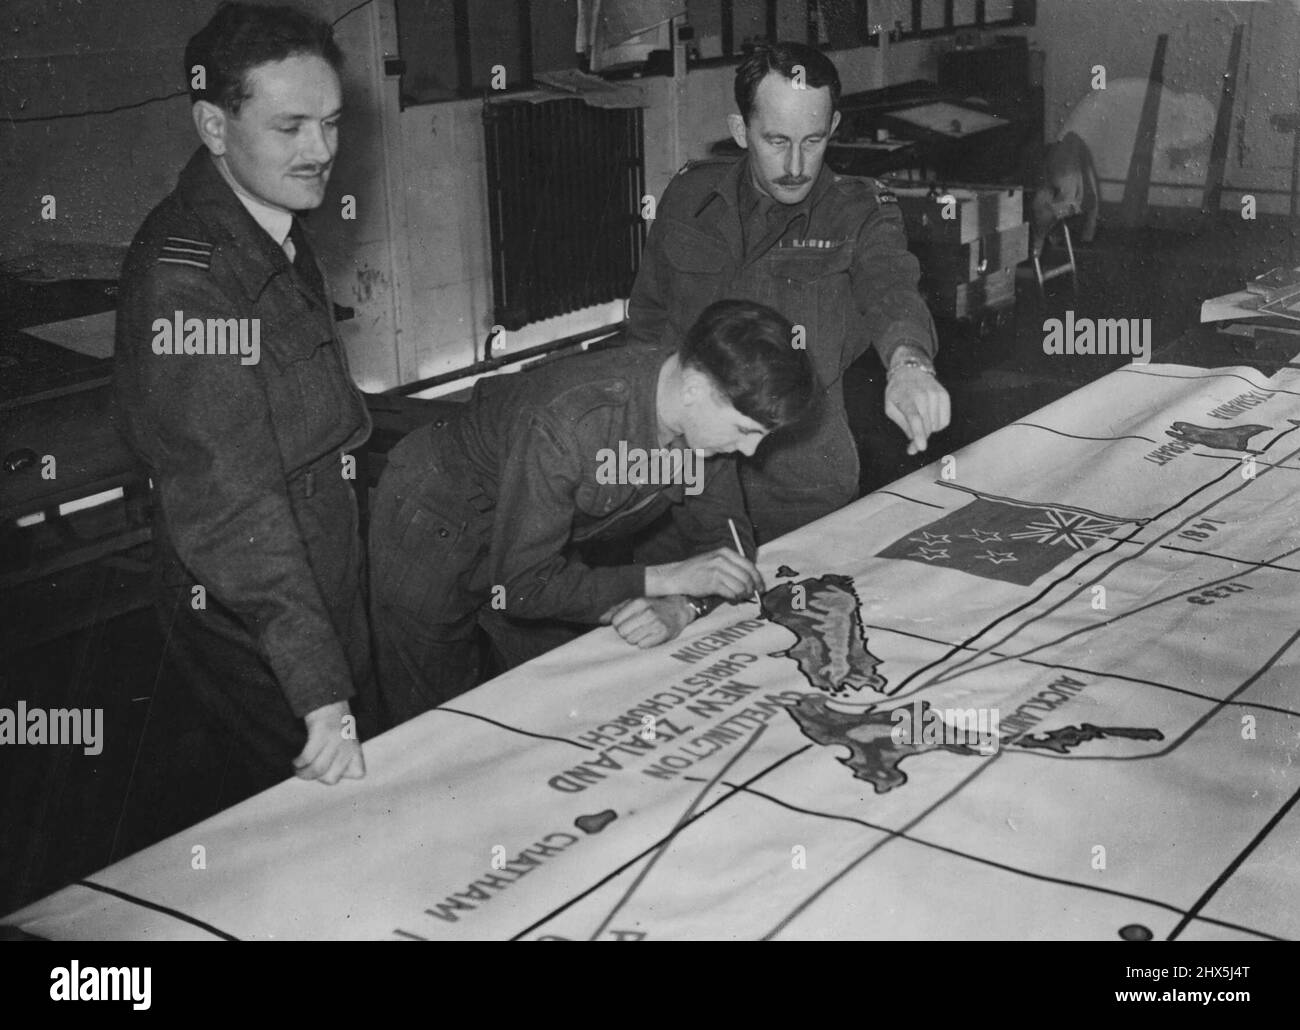 New Zealand Officers At Joint Services Staff College -- Wing Commander T.F. Gill, of Wellington, New Zealand (left) and Major B.R. Bullot, of Wellington, New Zealand (right) watching Private D. Howell, R.O.C. London at work painting a large-scale map, at the Joint Services Staff College. At the Joint Services Staff College, at Latimer, Chesham, Buckinghamshire, which is administered by the War office, officers of the combined services - the Navy, Army, and Air Force, are trained for appointments on joint Staffs, and to develop mutual understanding and a common doctrine between the Services, Stock Photo